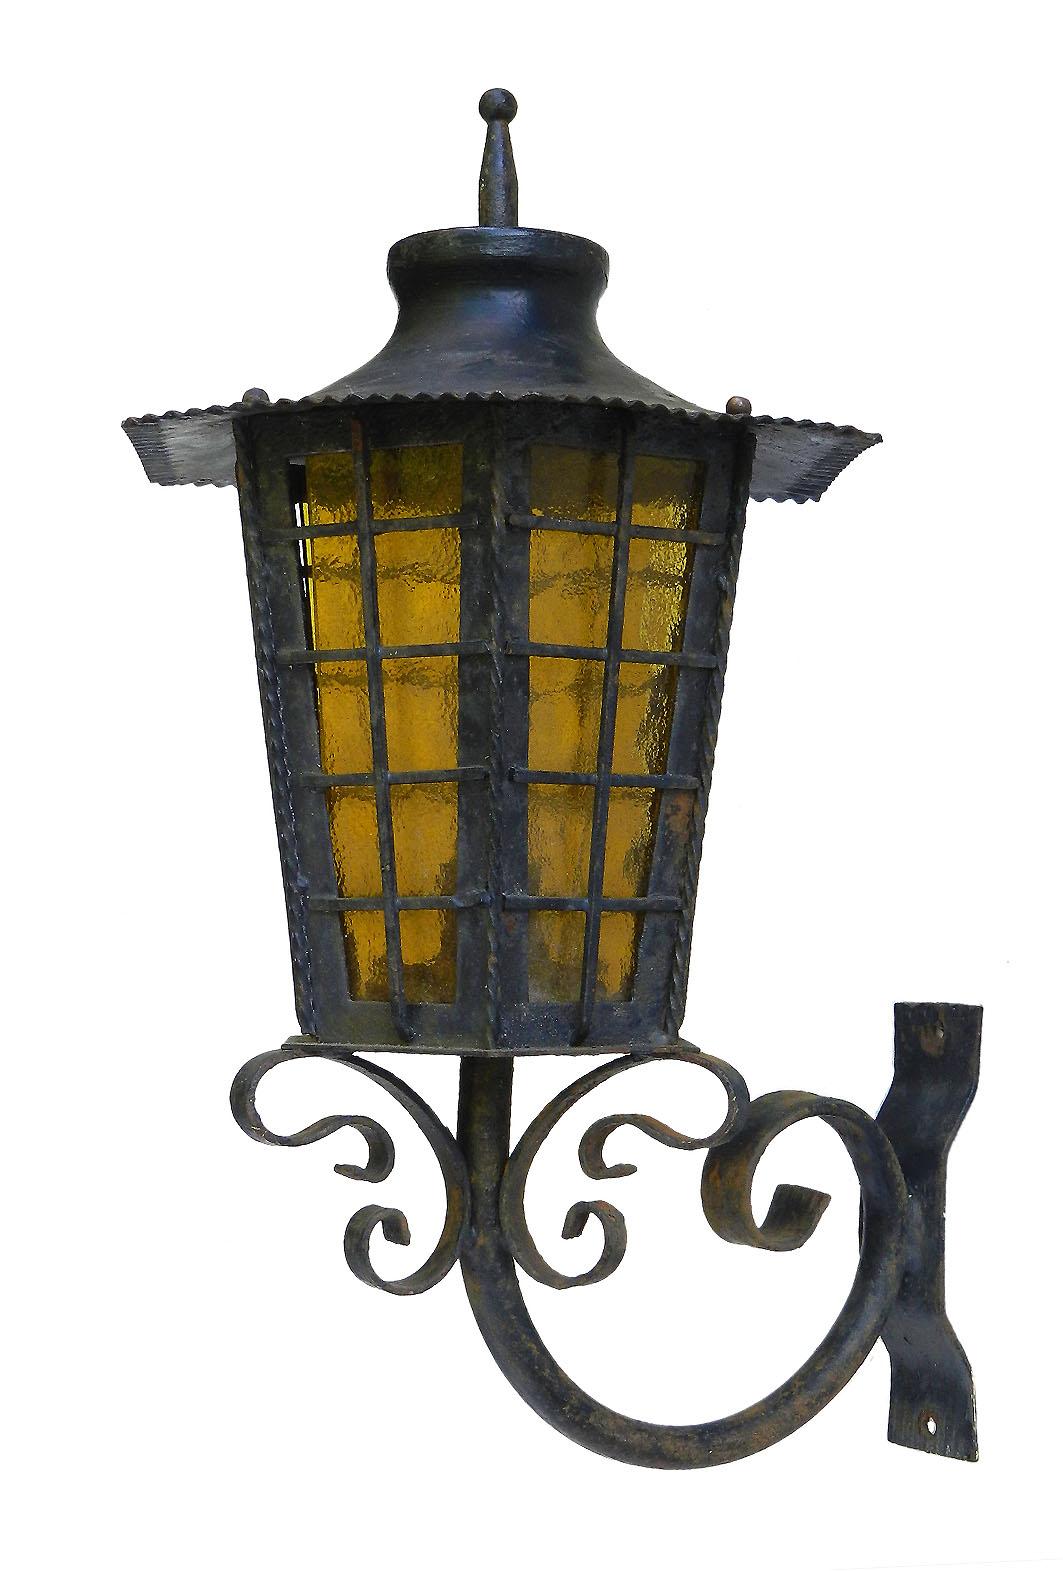 Pair of exterior wall lights lantern sconces wrought iron and obscured amber glass, circa 1920
Great weathered patina, can be re painted if preferred
Good vintage condition sound and solid
These can be rewired to USA and EU or UK